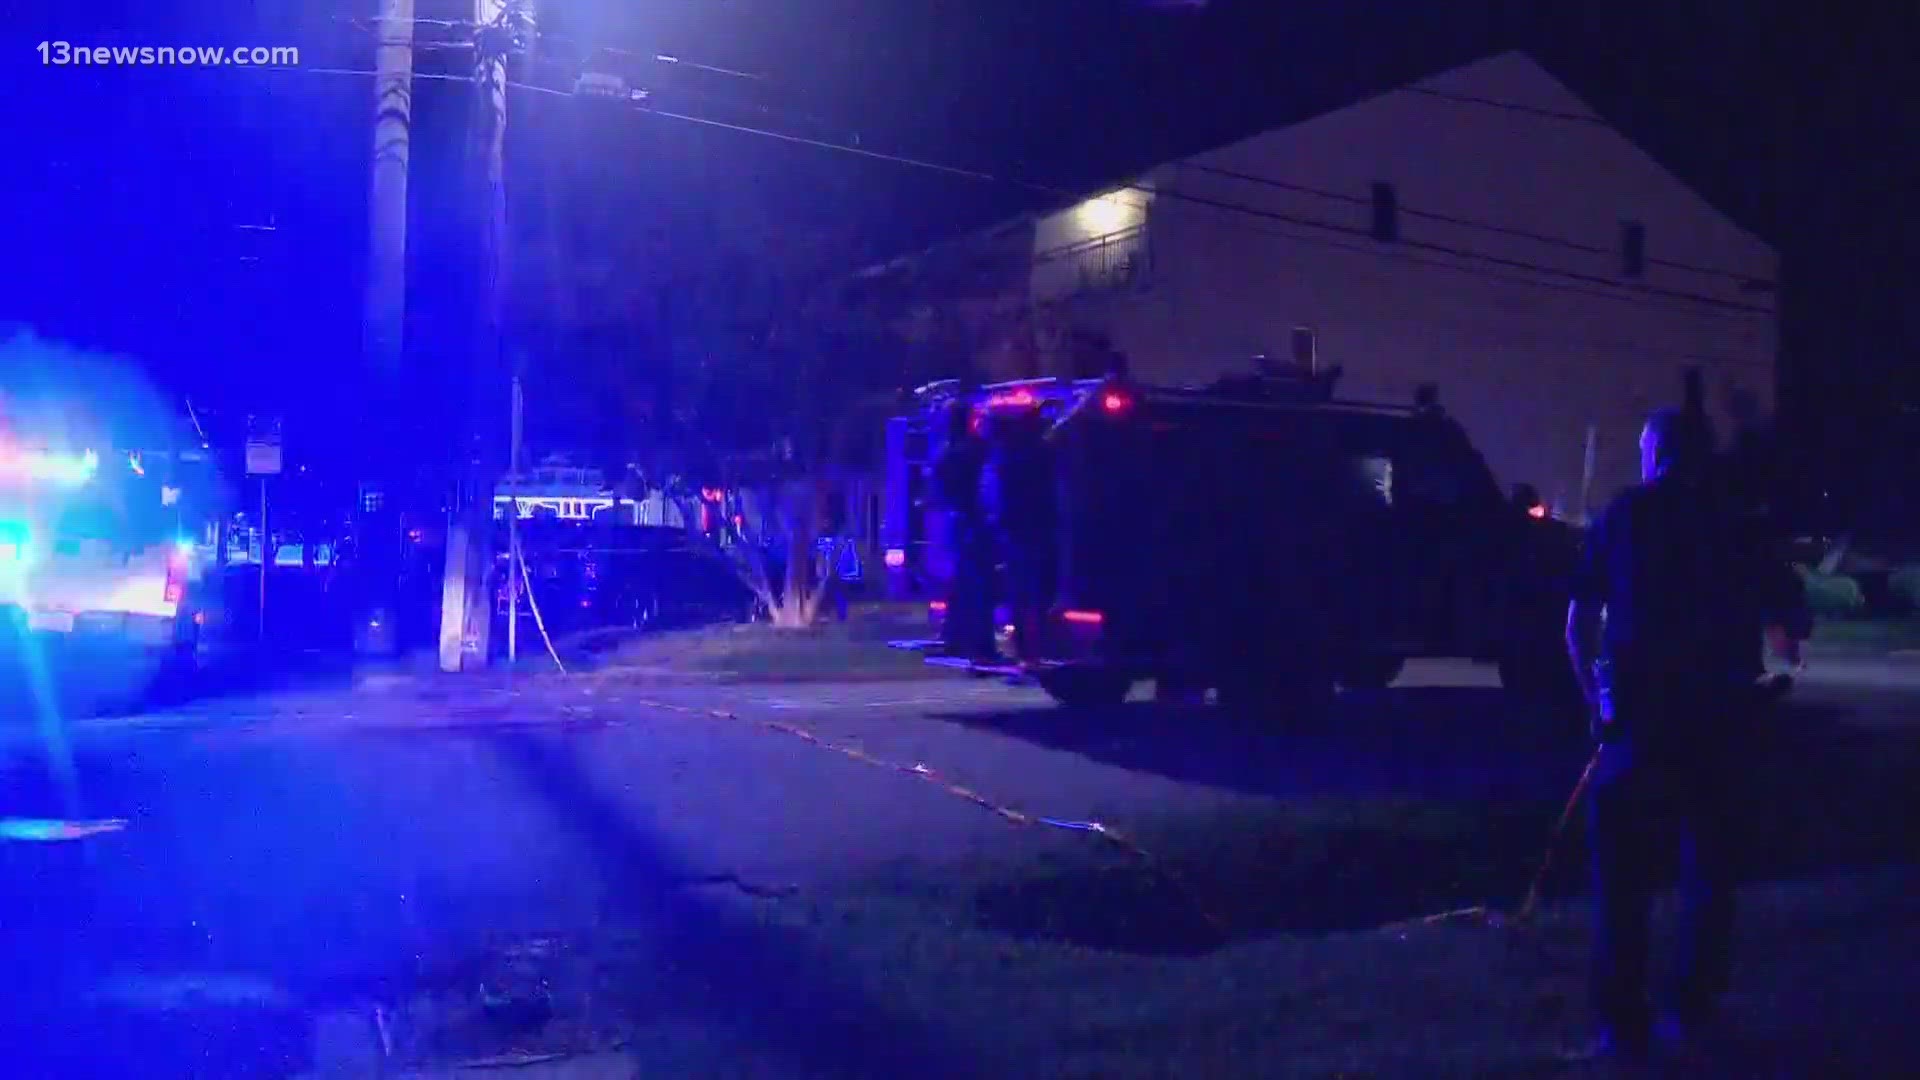 According to police, an individual barricaded themselves inside somewhere in the 500 block of 18th Street in the VIBE District near the Virginia Beach Oceanfront.